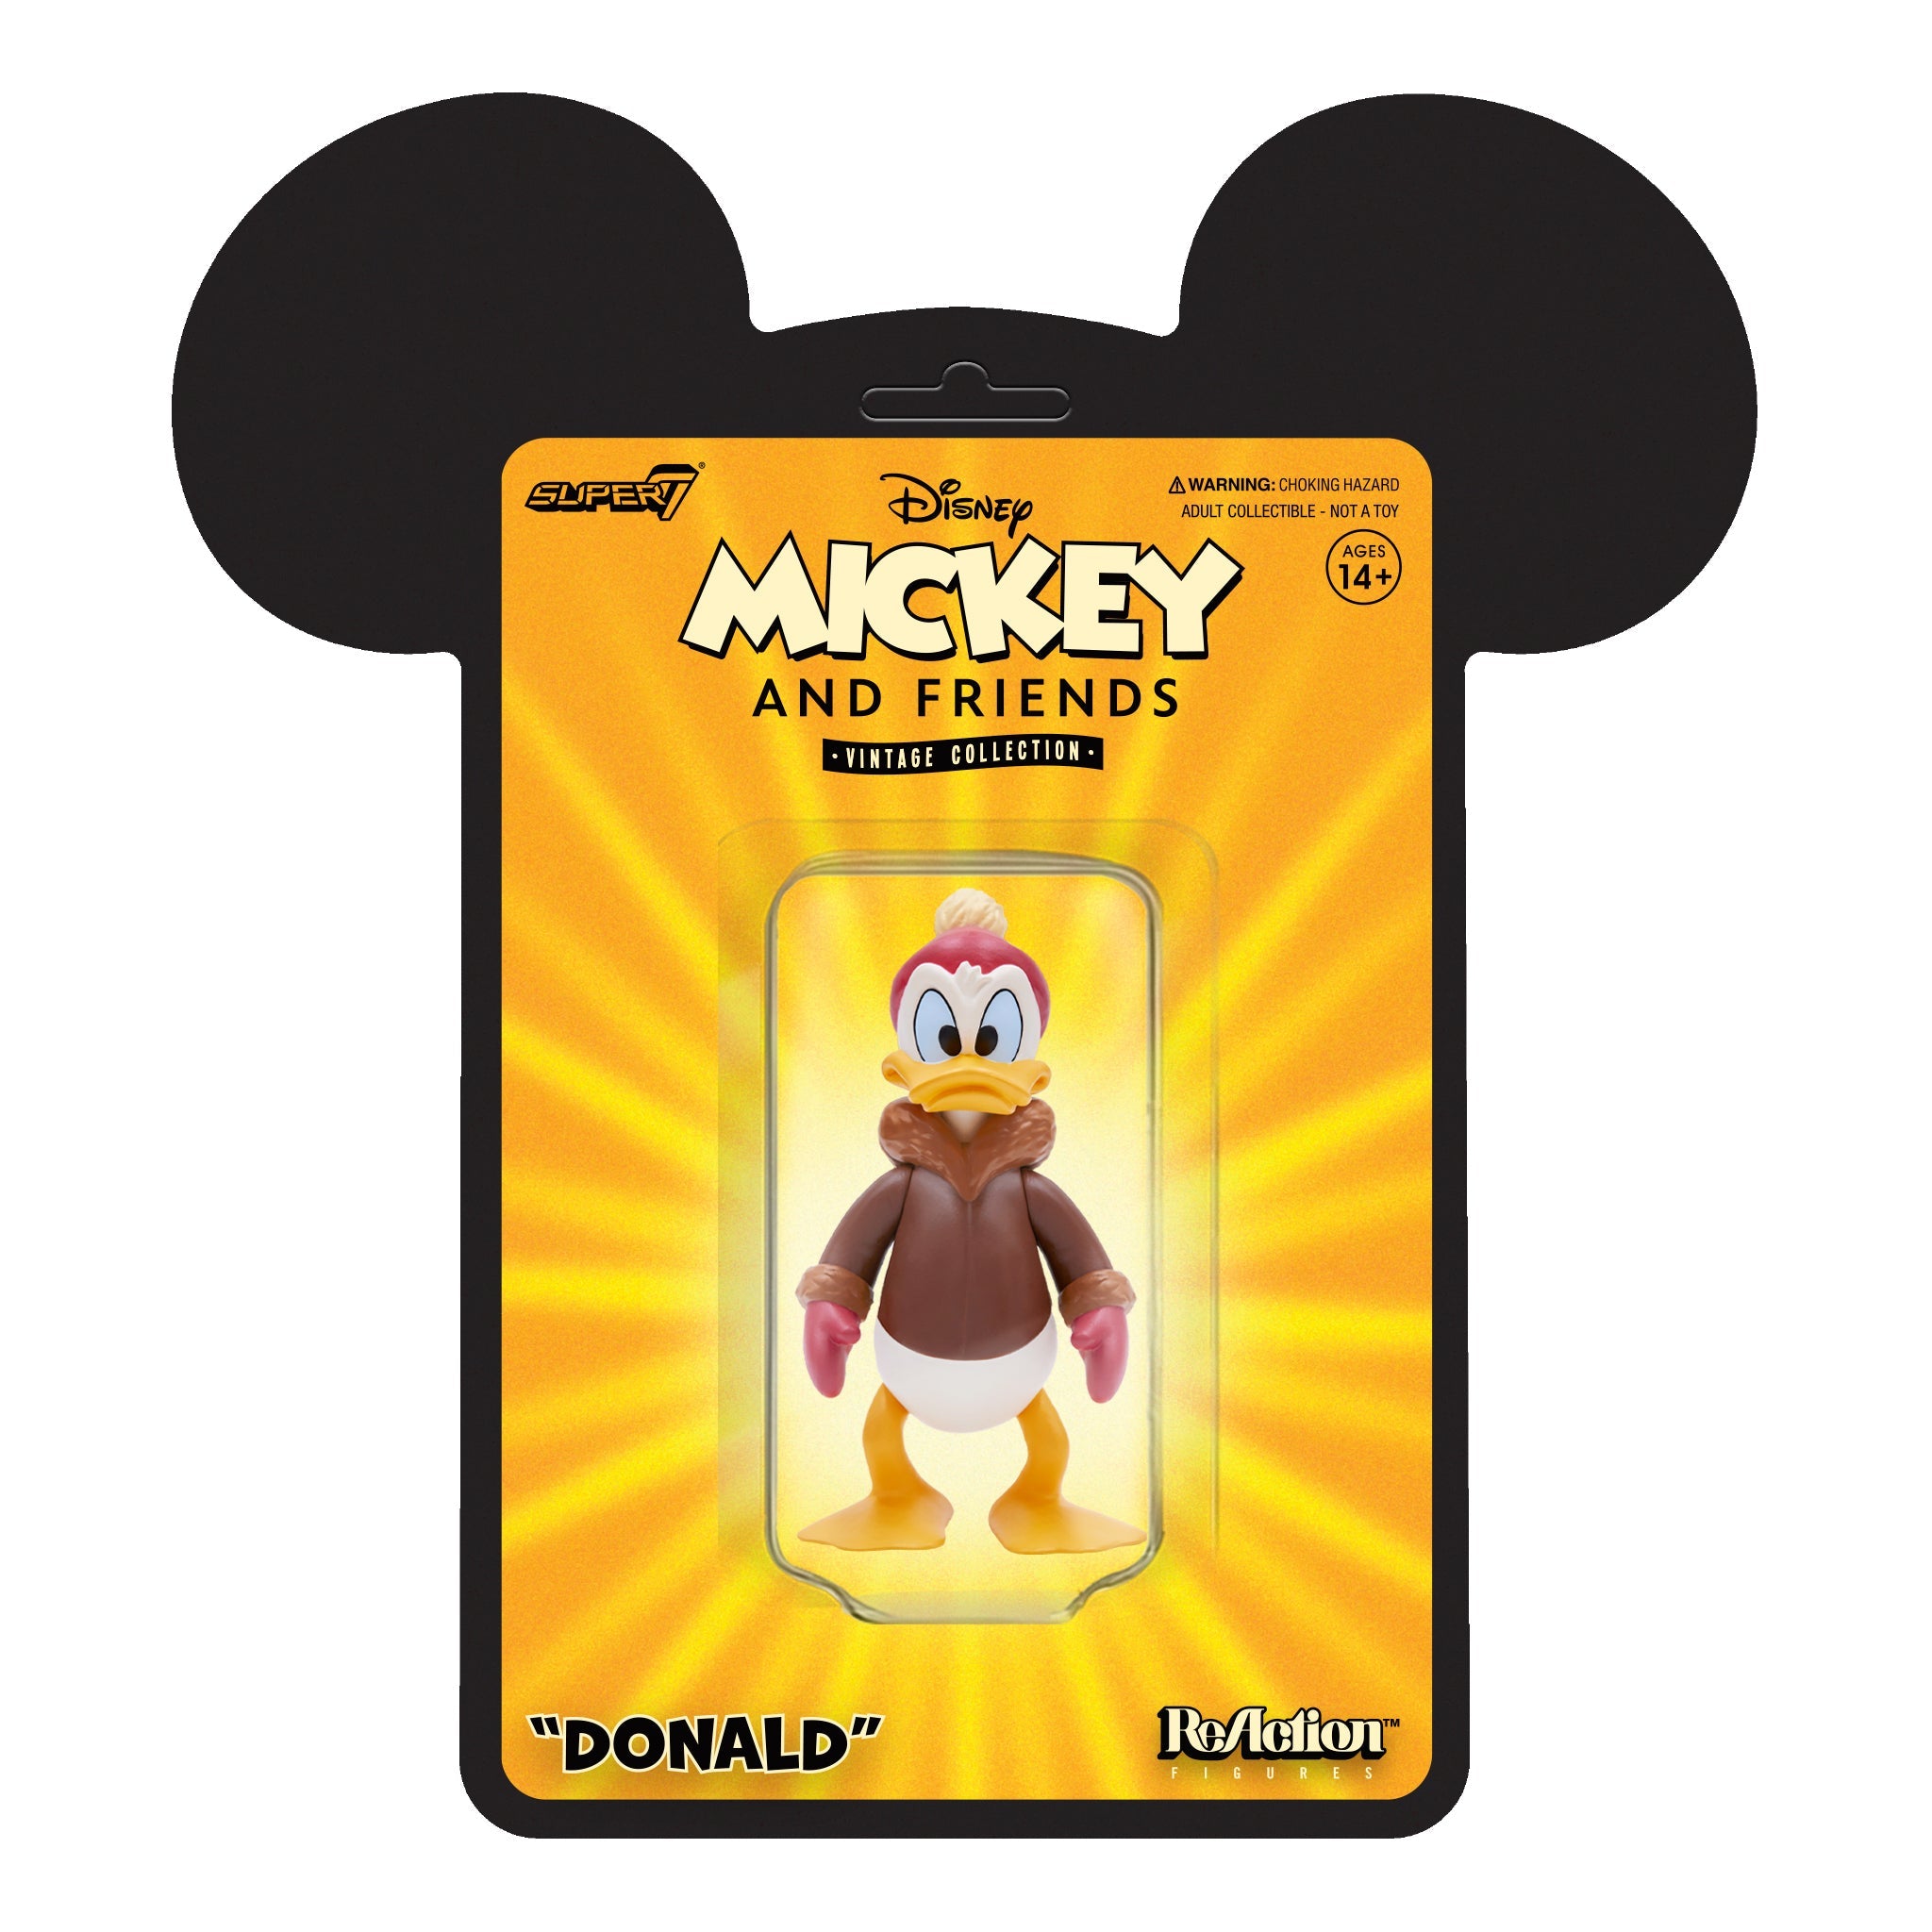 Super7 Reaction: Disney Mickey And Friends Vintage Collection - Pato Donald